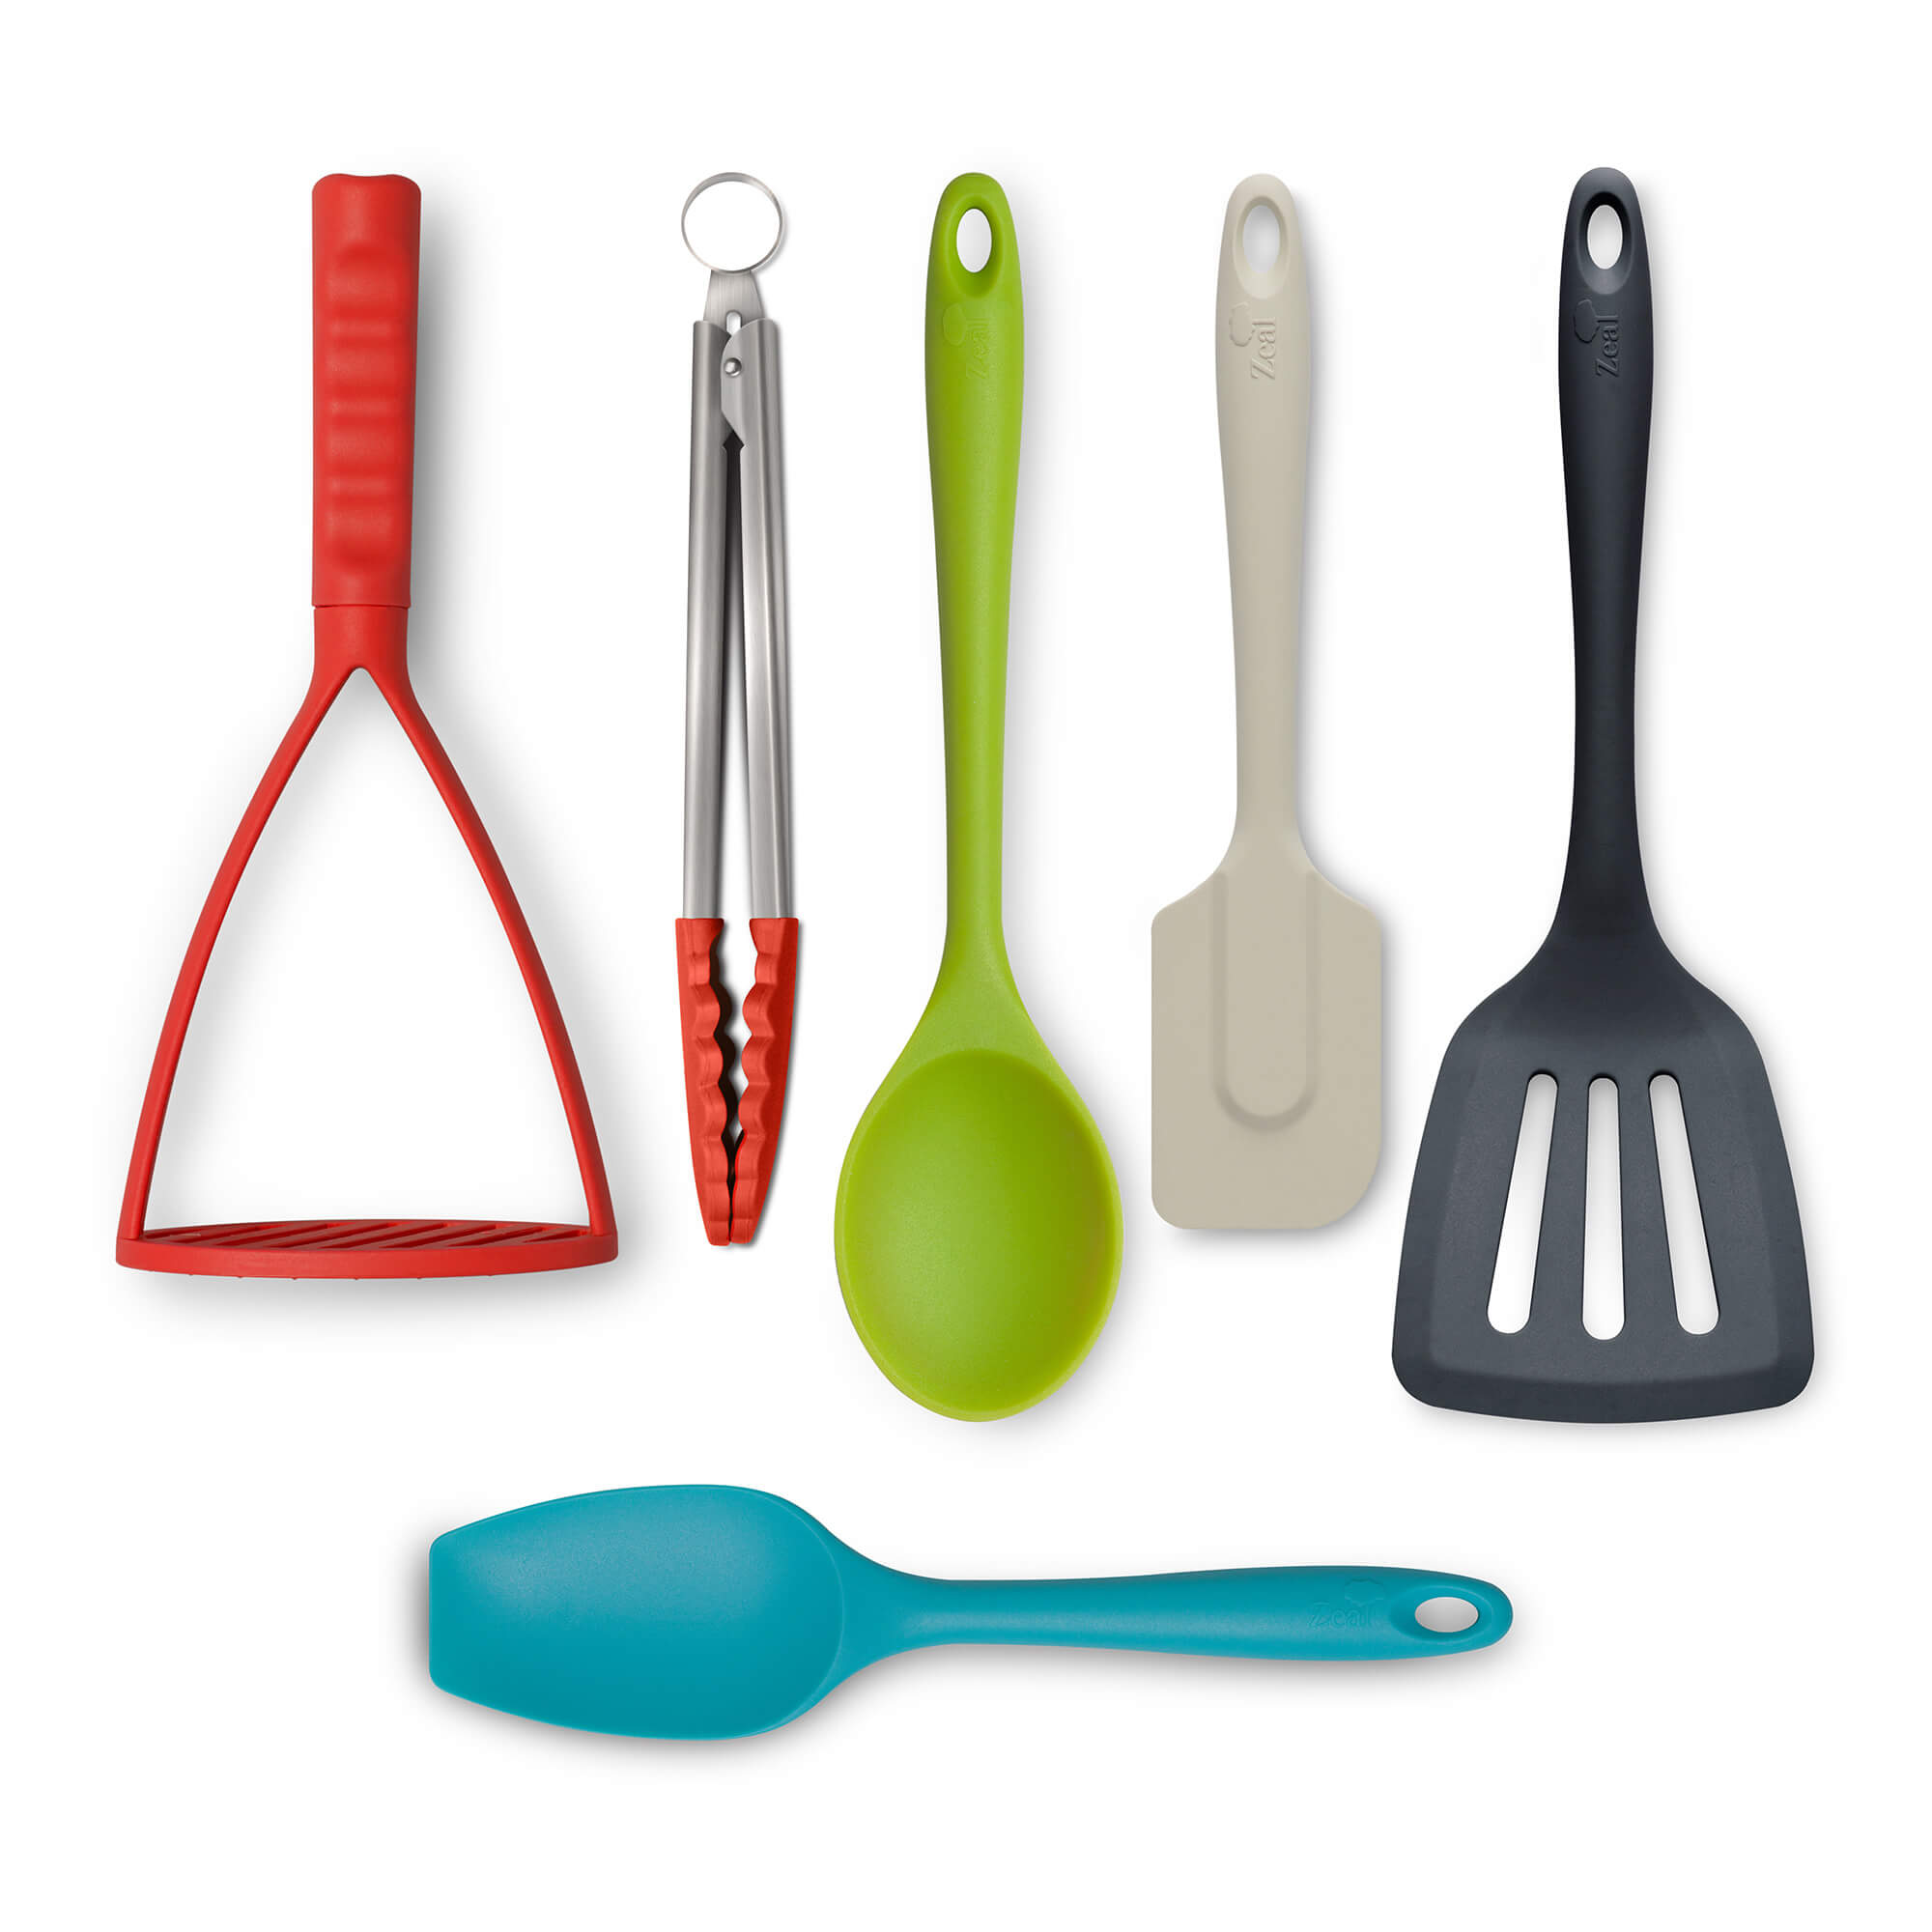 Zeal Kitchen Tongs, Flexitech Masher, Slotted Turner, Spoon, Spatula Spoon, Spatula Set in Bright Colours